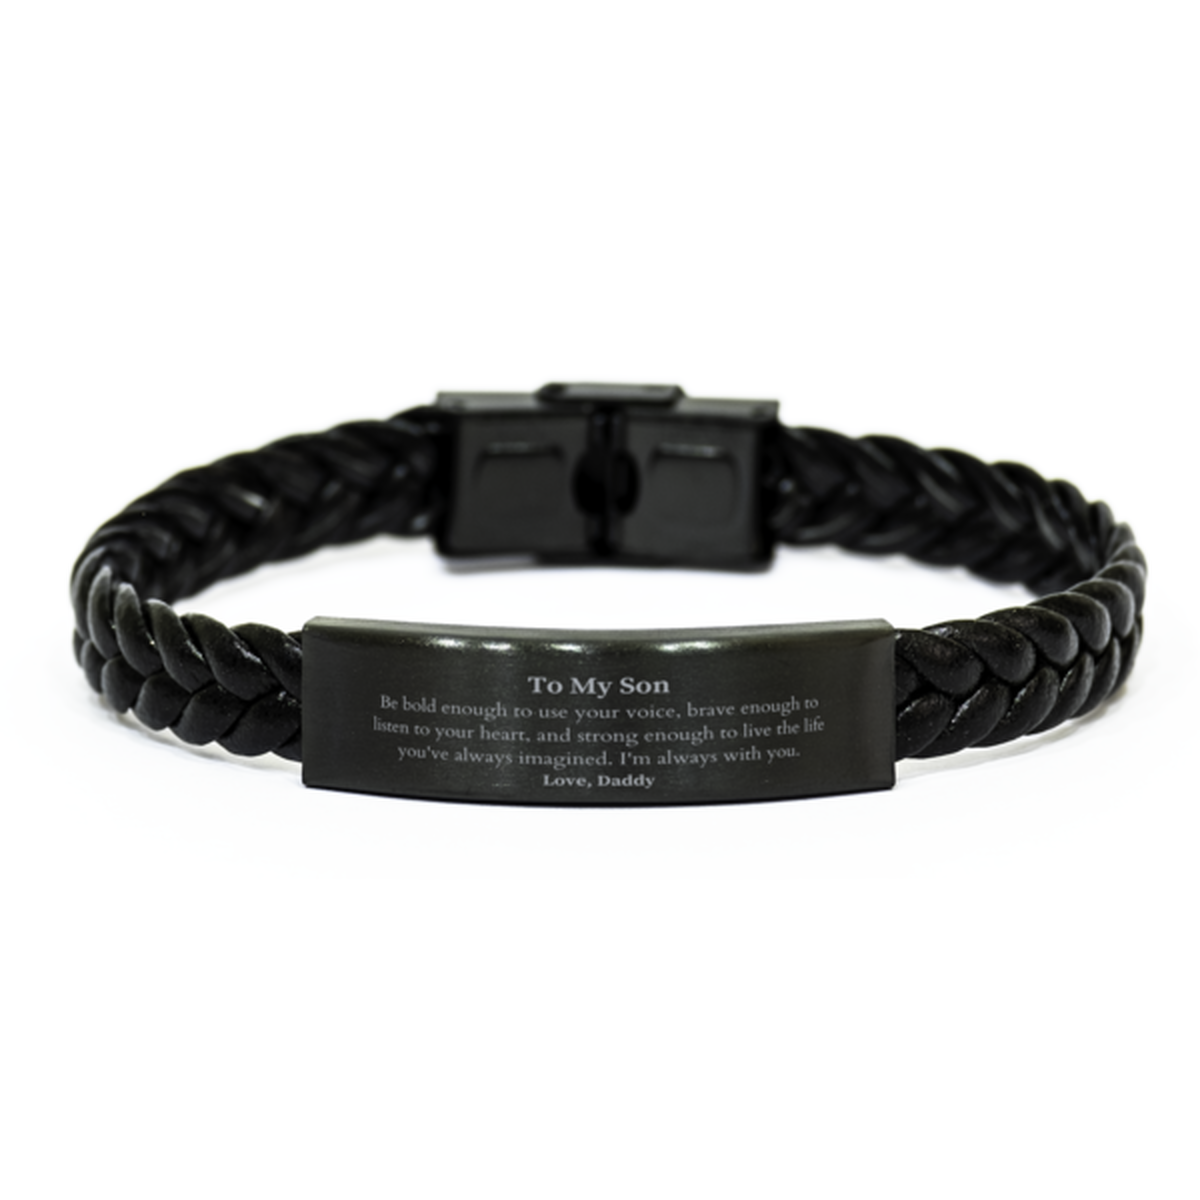 Keepsake Son Braided Leather Bracelet Gift Idea Graduation Christmas Birthday Son from Daddy, Son Be bold enough to use your voice, brave enough to listen to your heart. Love, Daddy